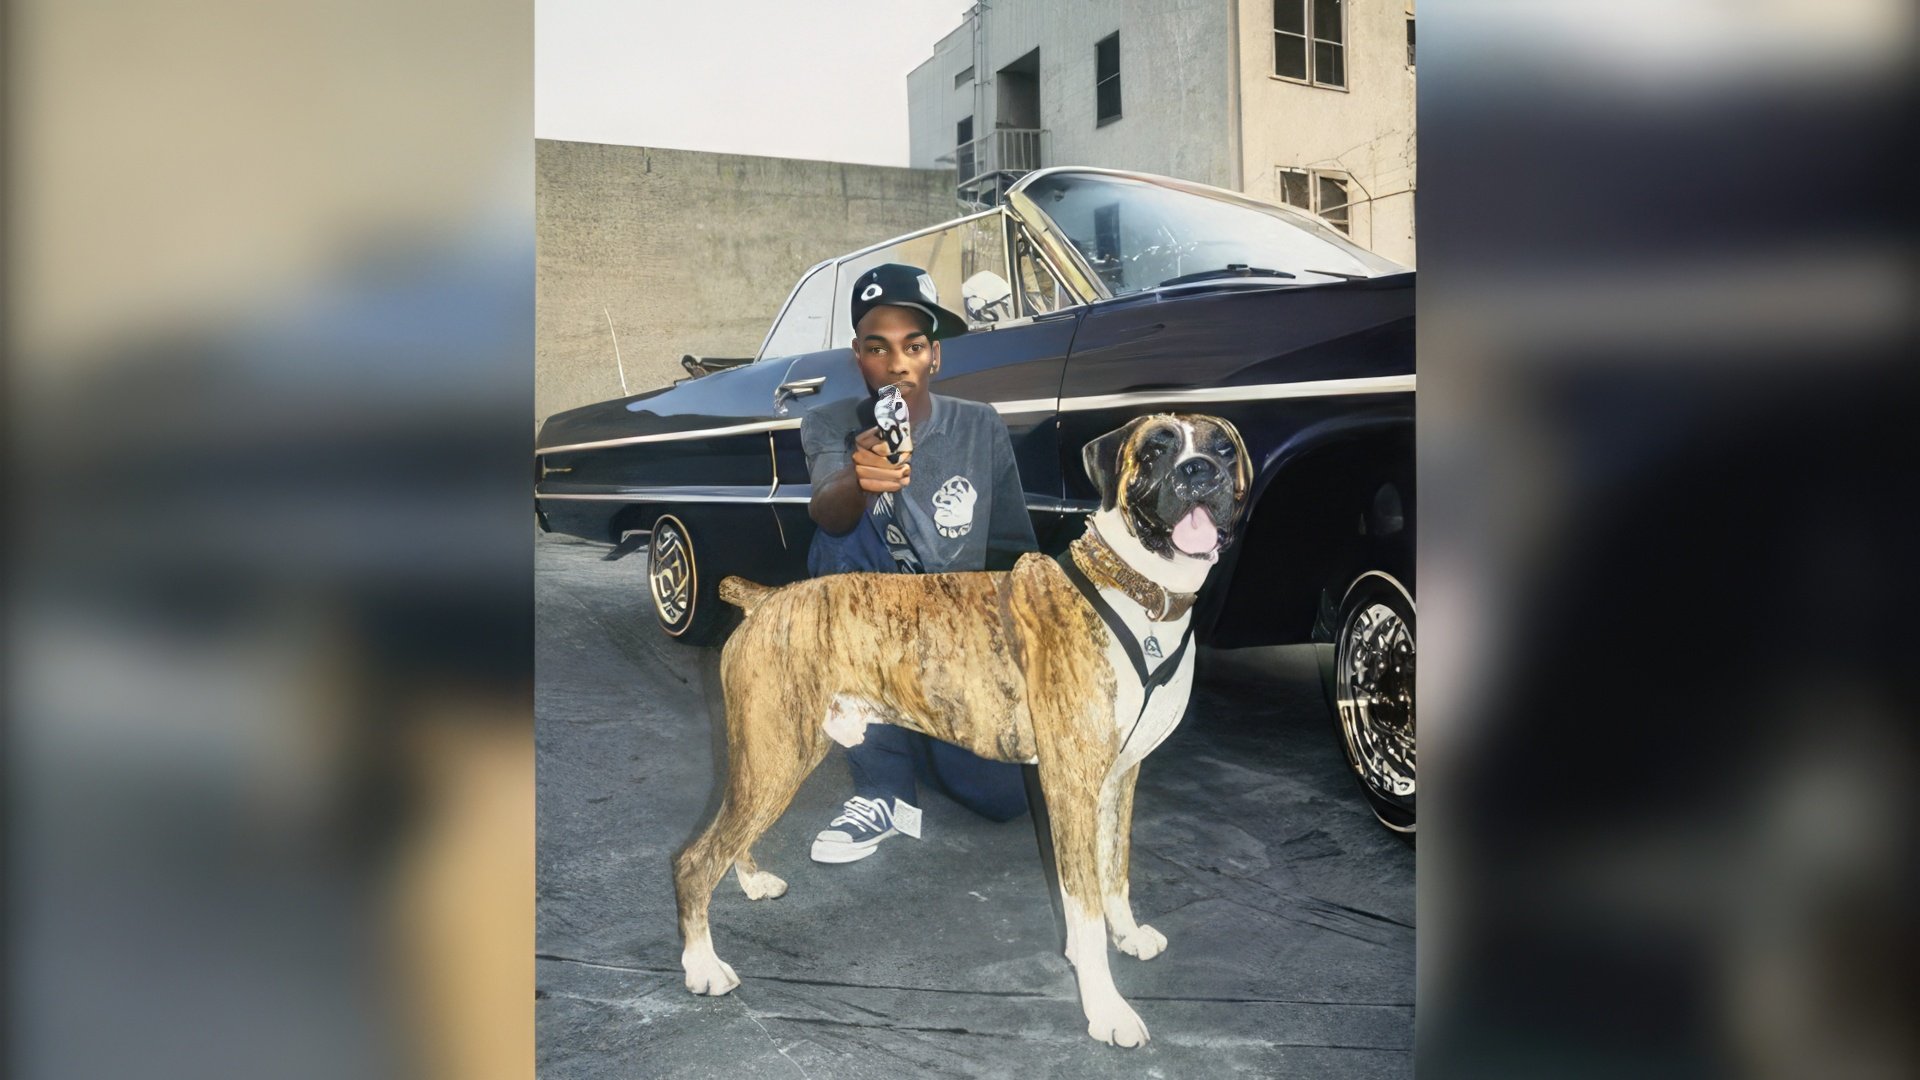 Young Snoop Dogg